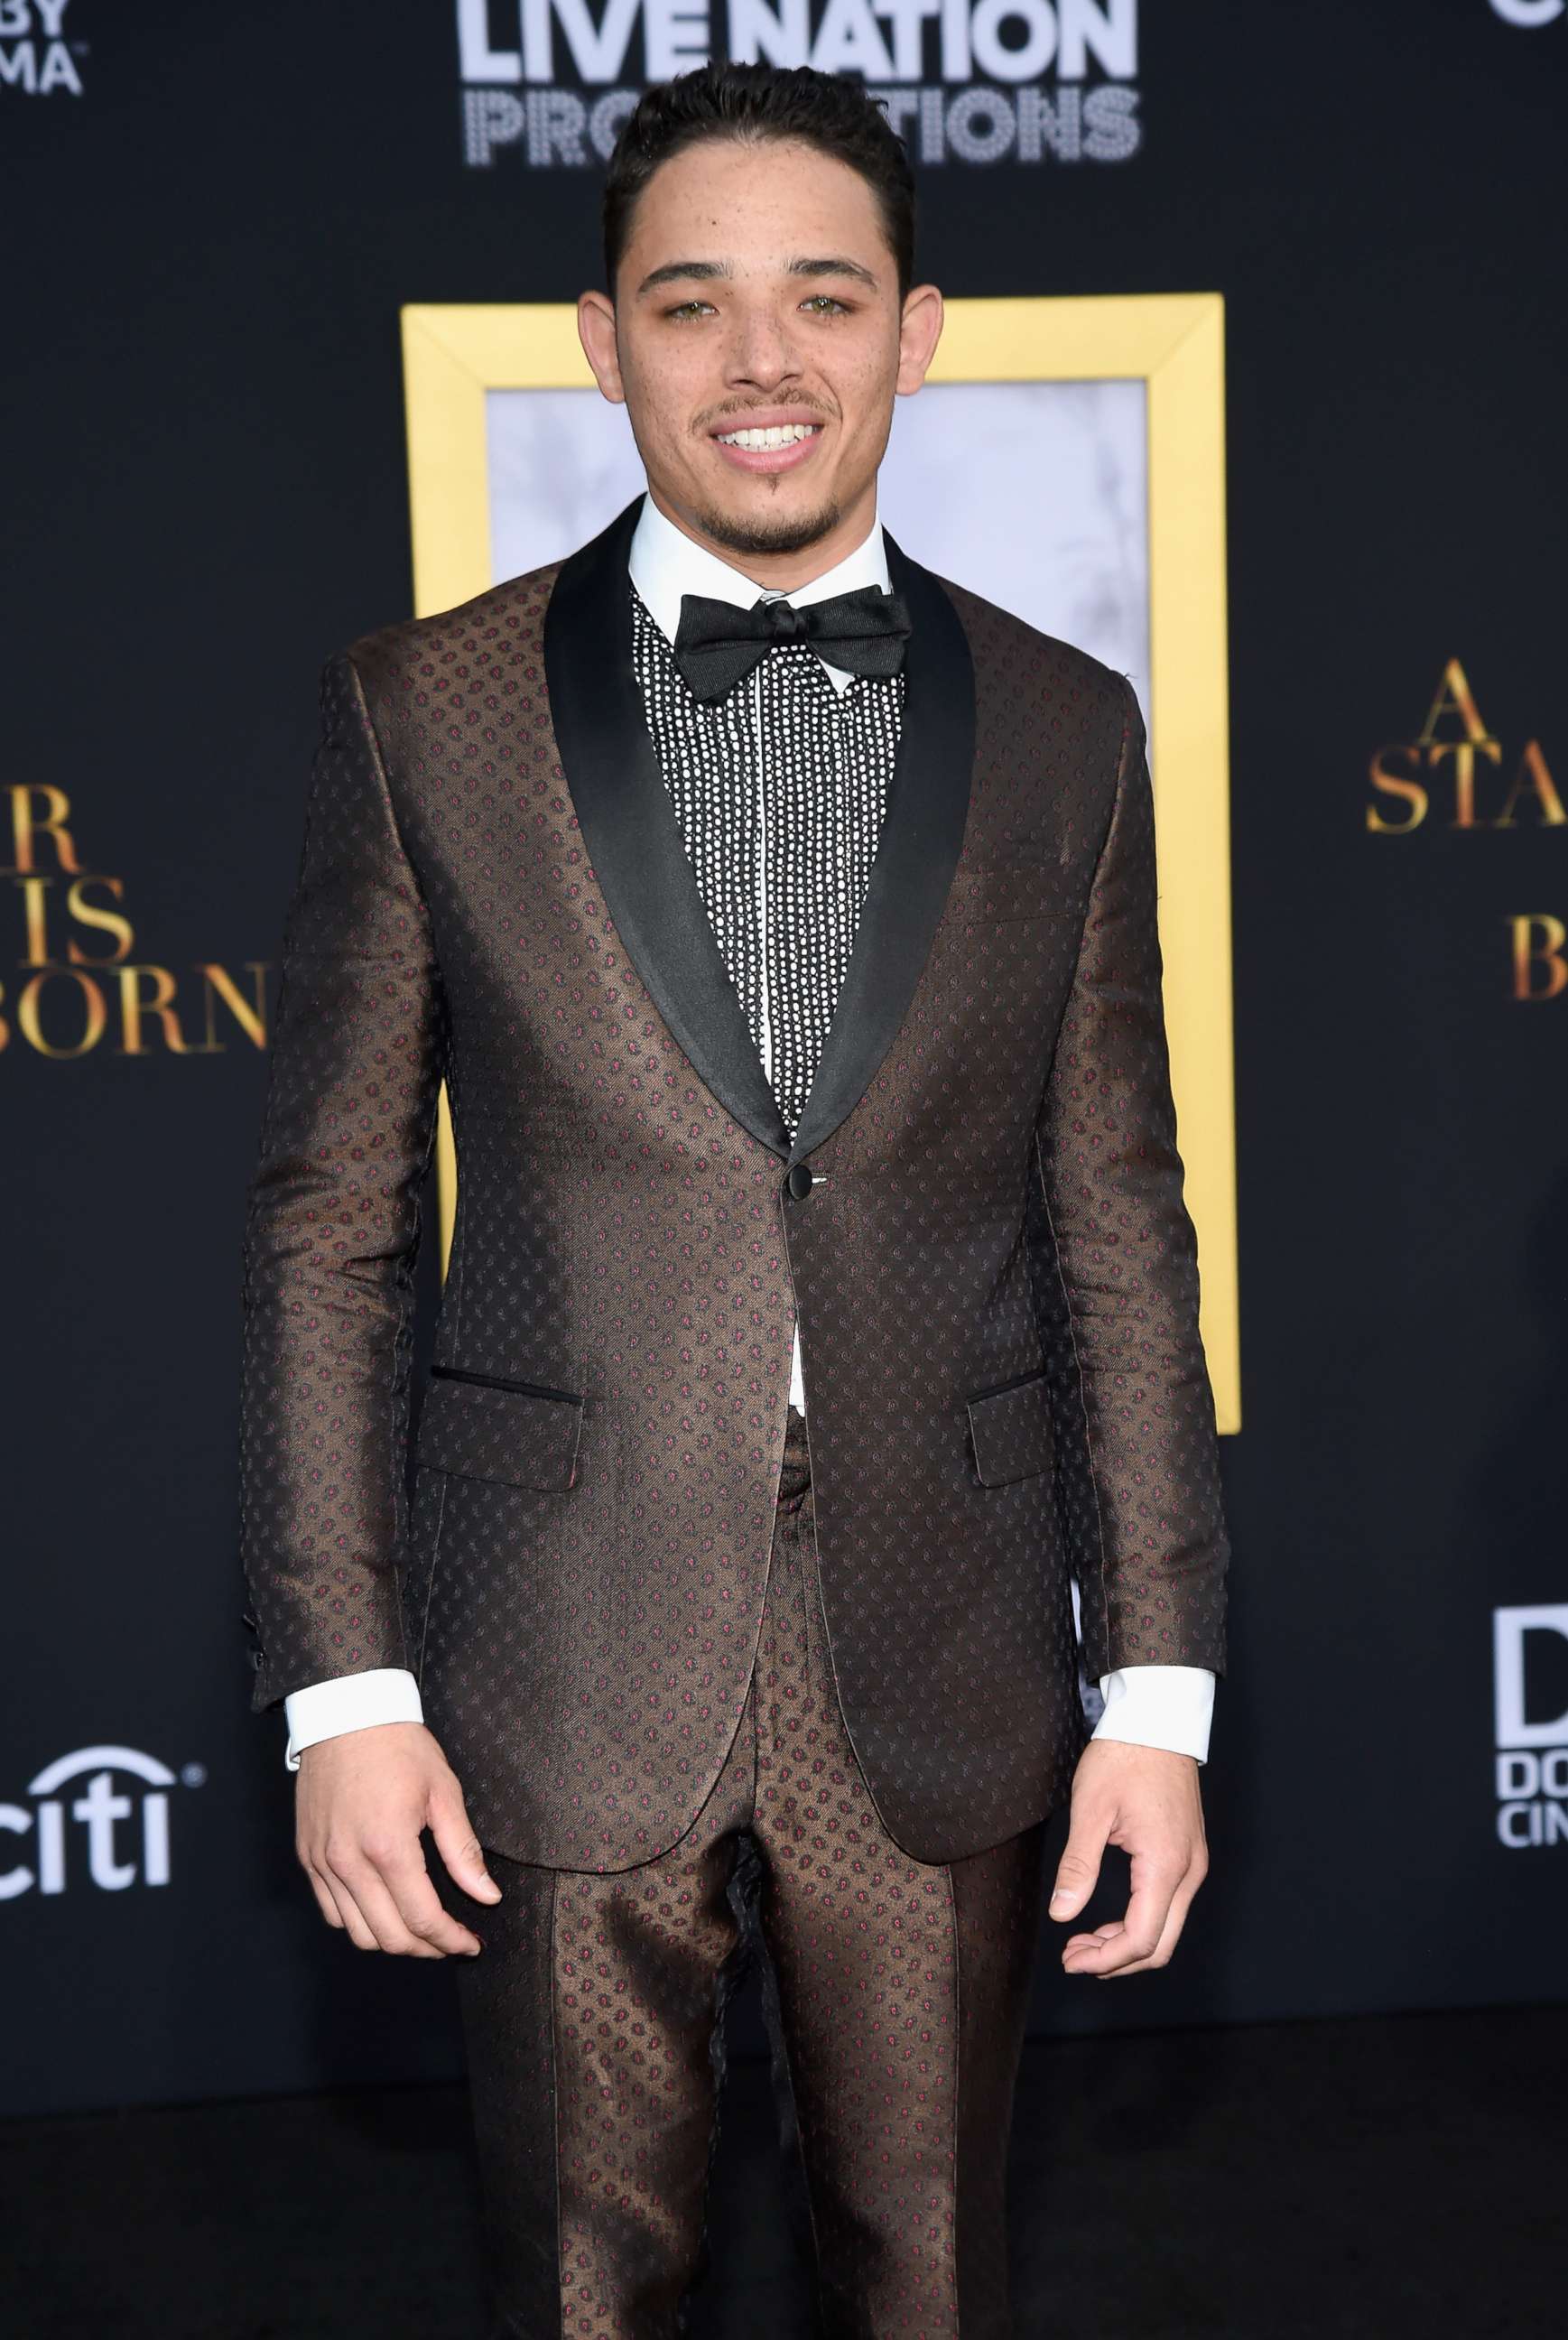 PHOTO: Anthony Ramos attends the premiere of Warner Bros. Pictures' "A Star Is Born" at The Shrine Auditorium, Sept. 24, 2018, in Los Angeles.